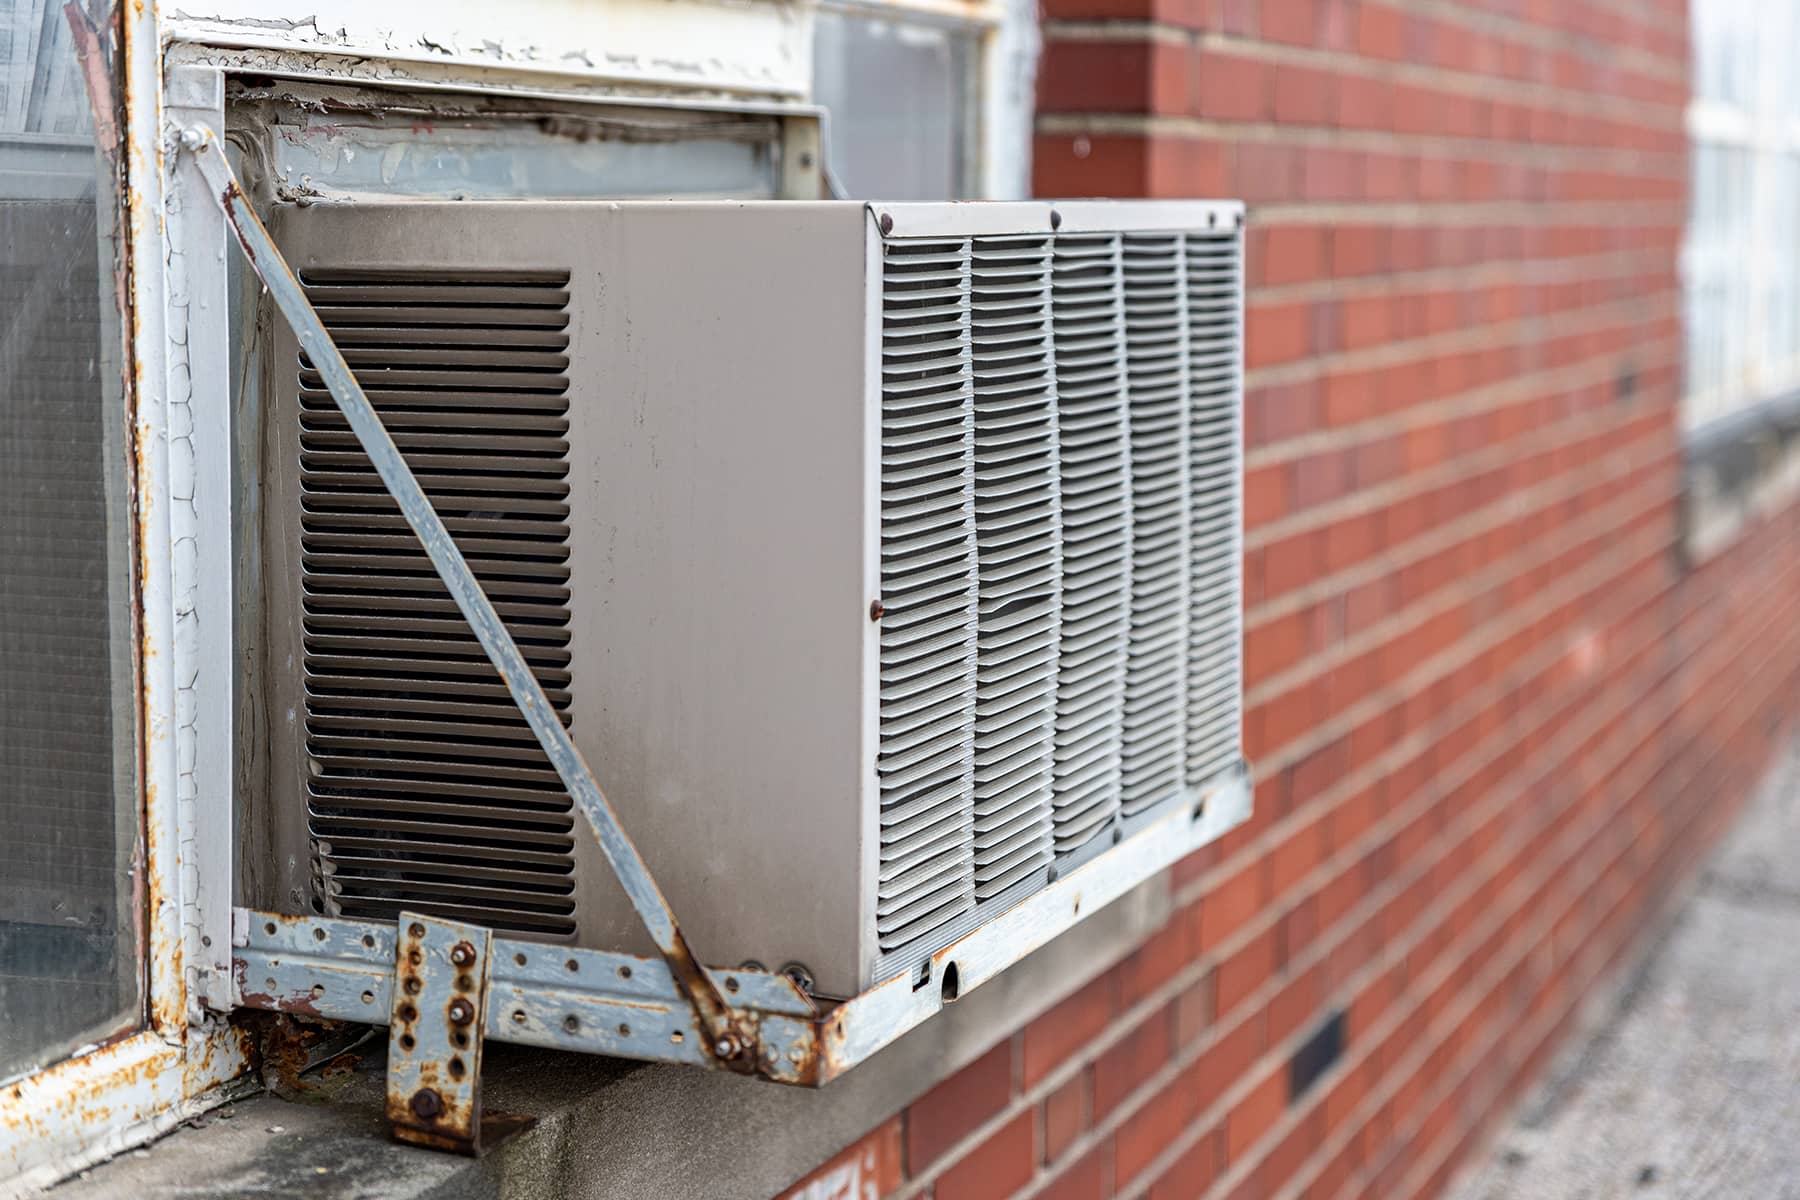 Scarce air conditioning: Milwaukee’s most at risk residents endure a lack of cooling assistance